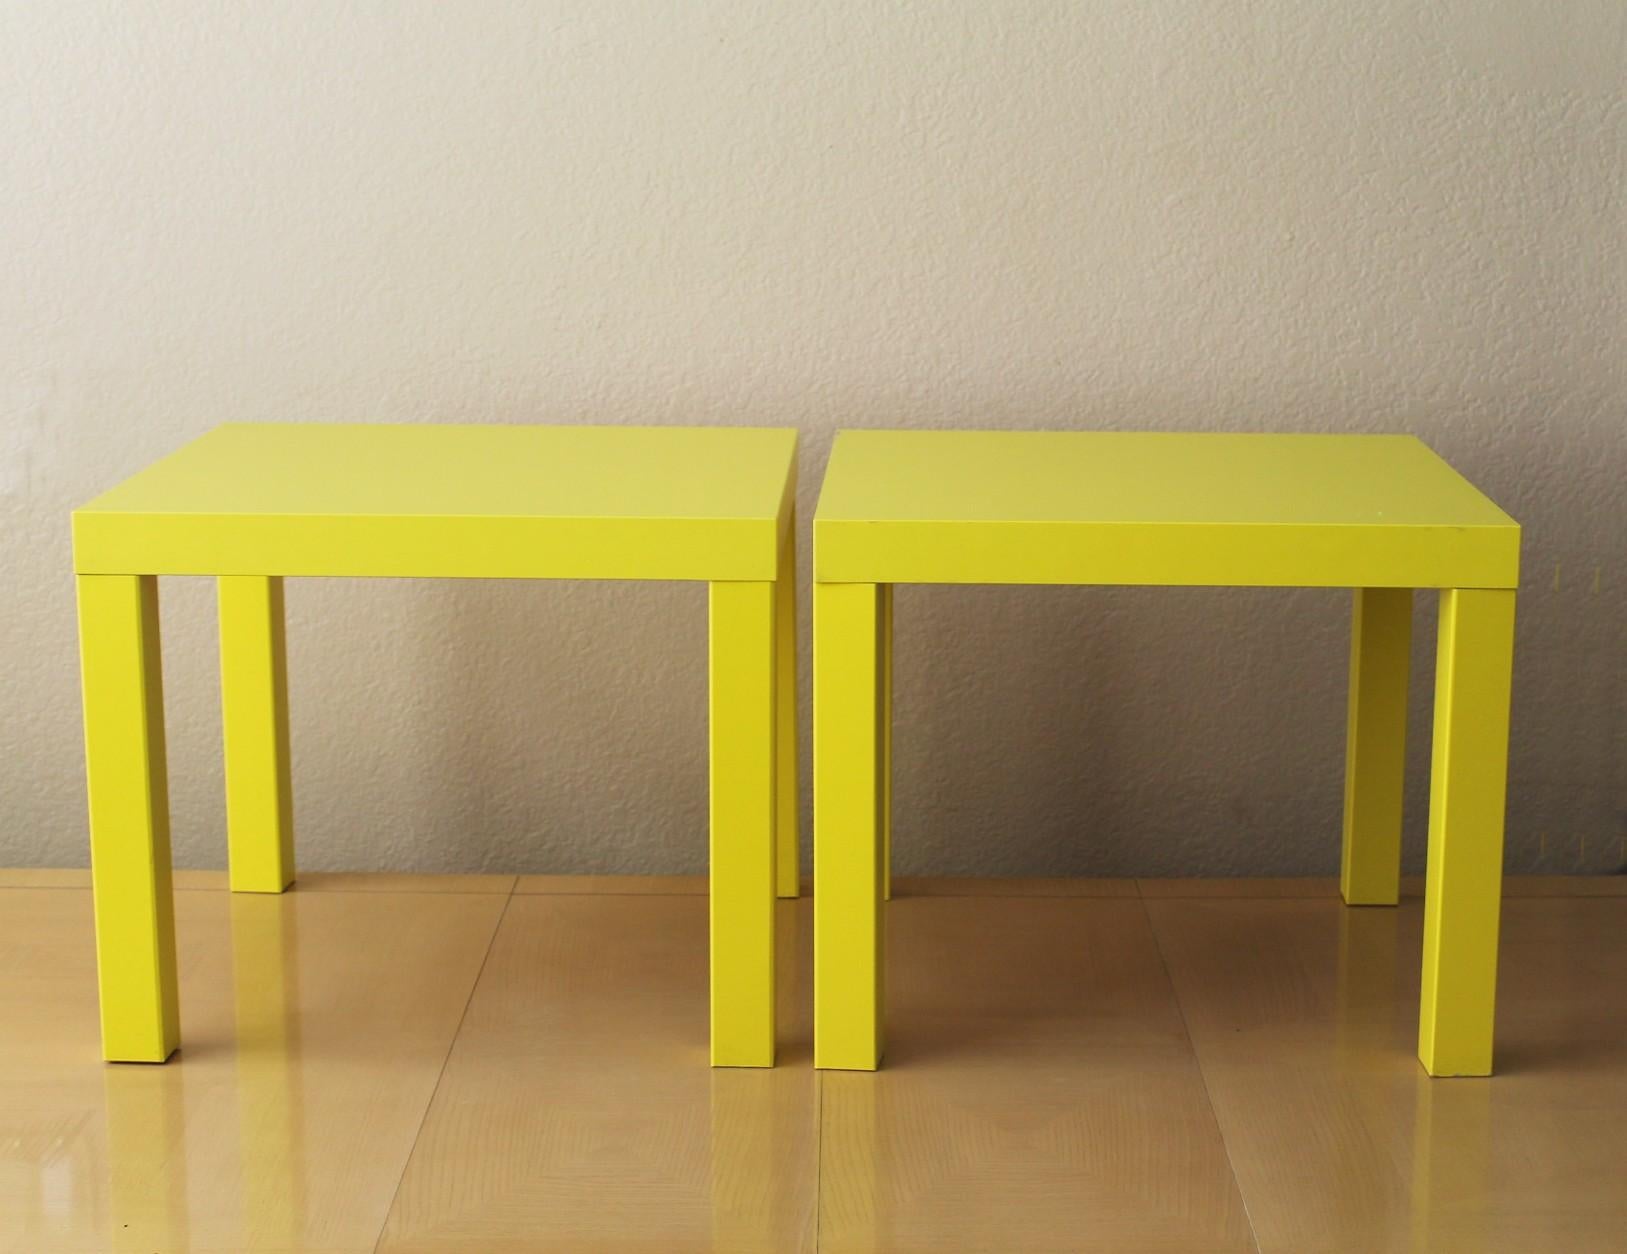 Late 20th Century Rare Pair Yellow Ikea Lack End Tables Sweden 1999 Art Memphis Postmodern Decor For Sale